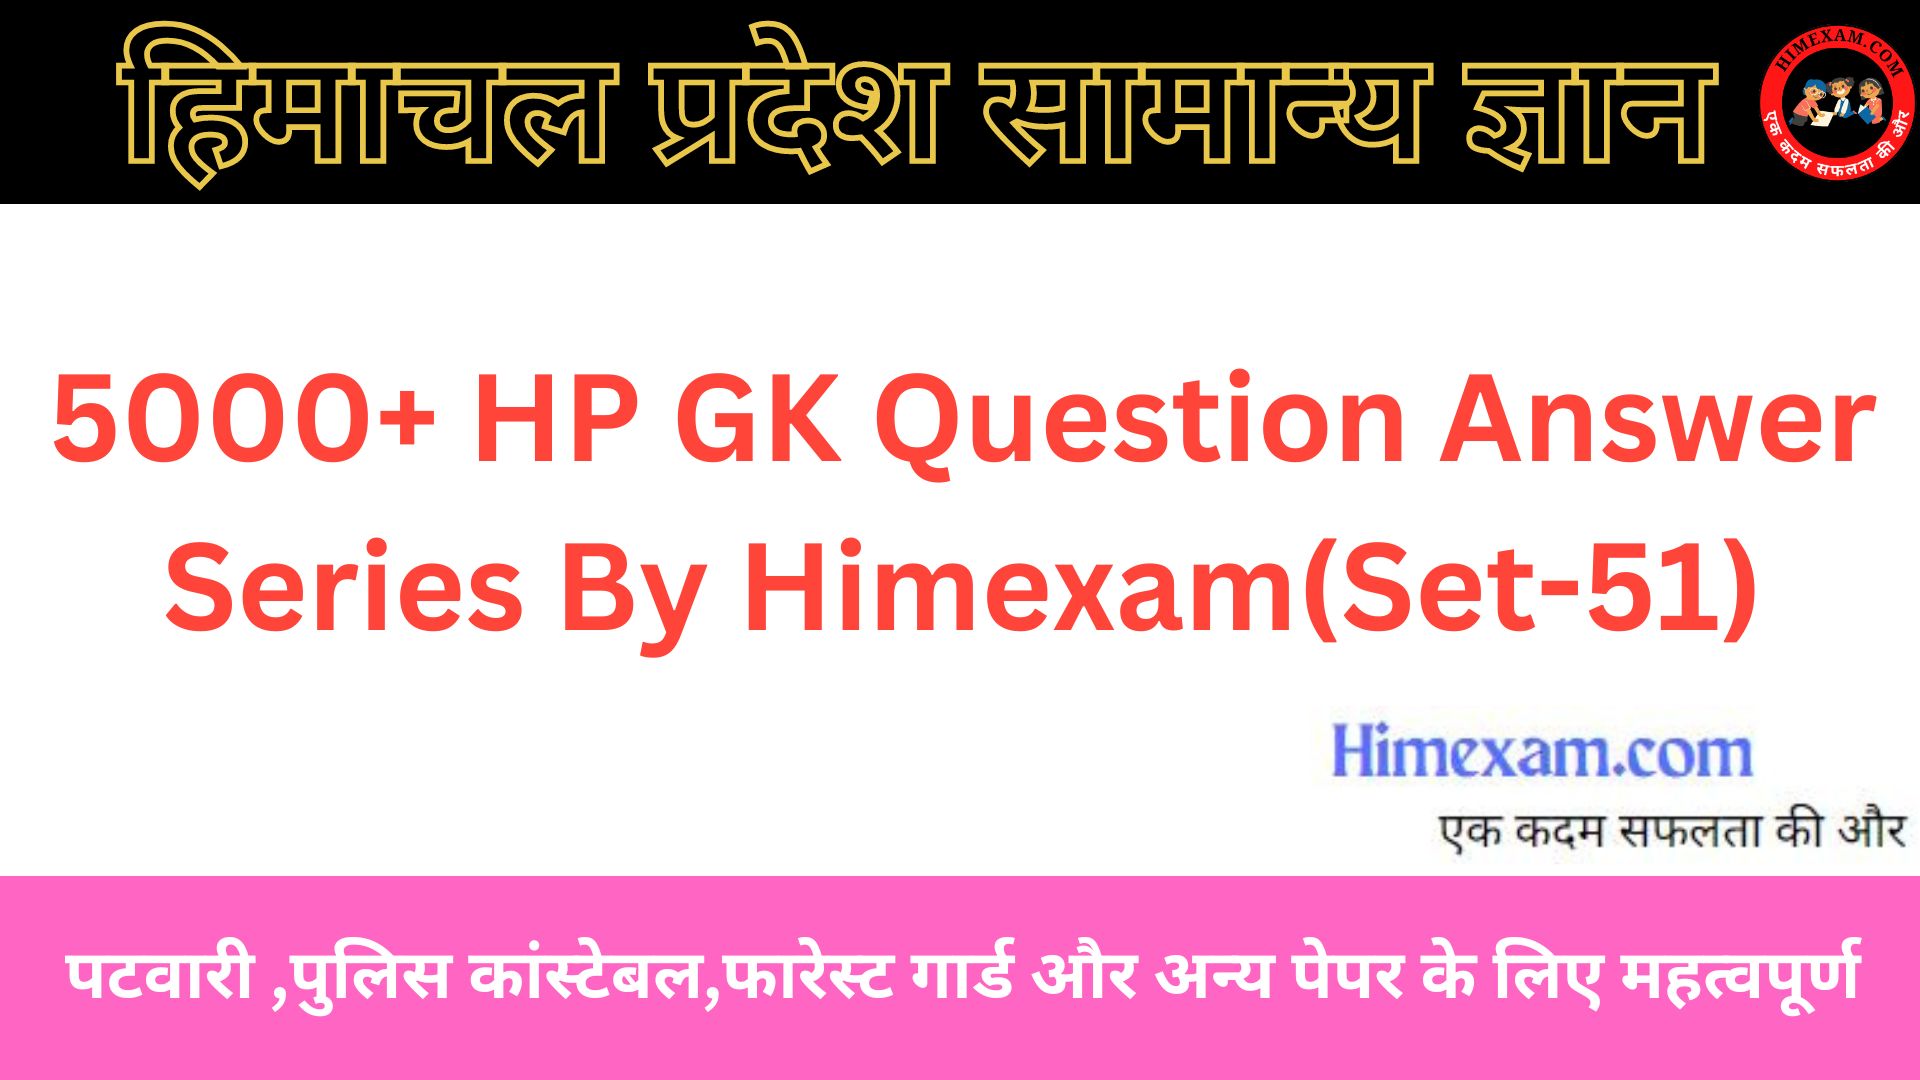 5000+ HP GK Question Answer Series By Himexam(Set-51)